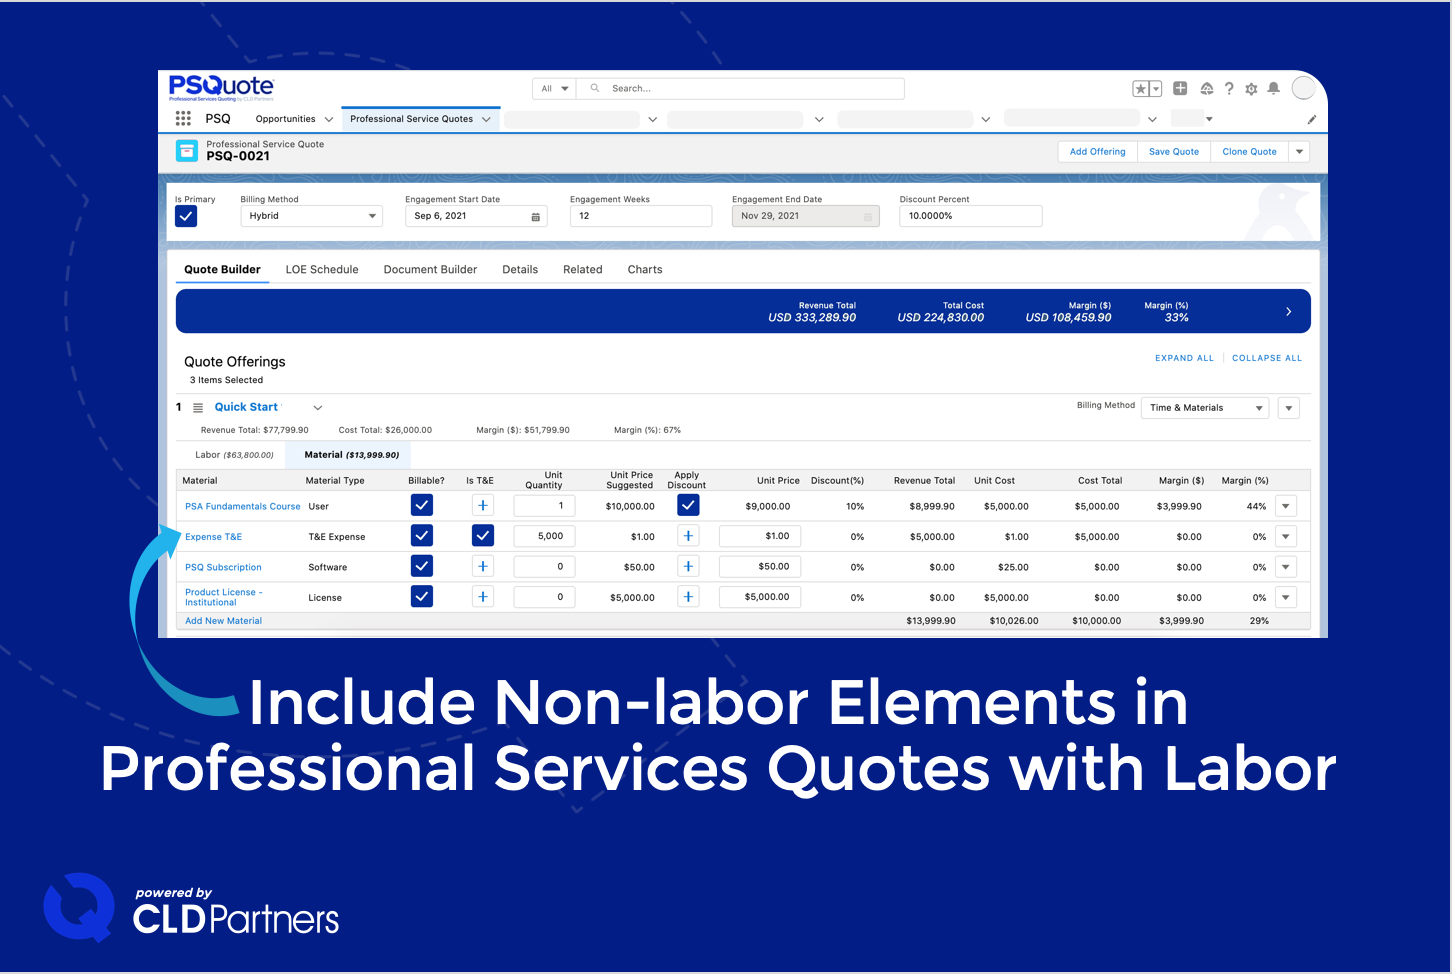 Support adding non-labor elements like expenses that are commonly sold with Services